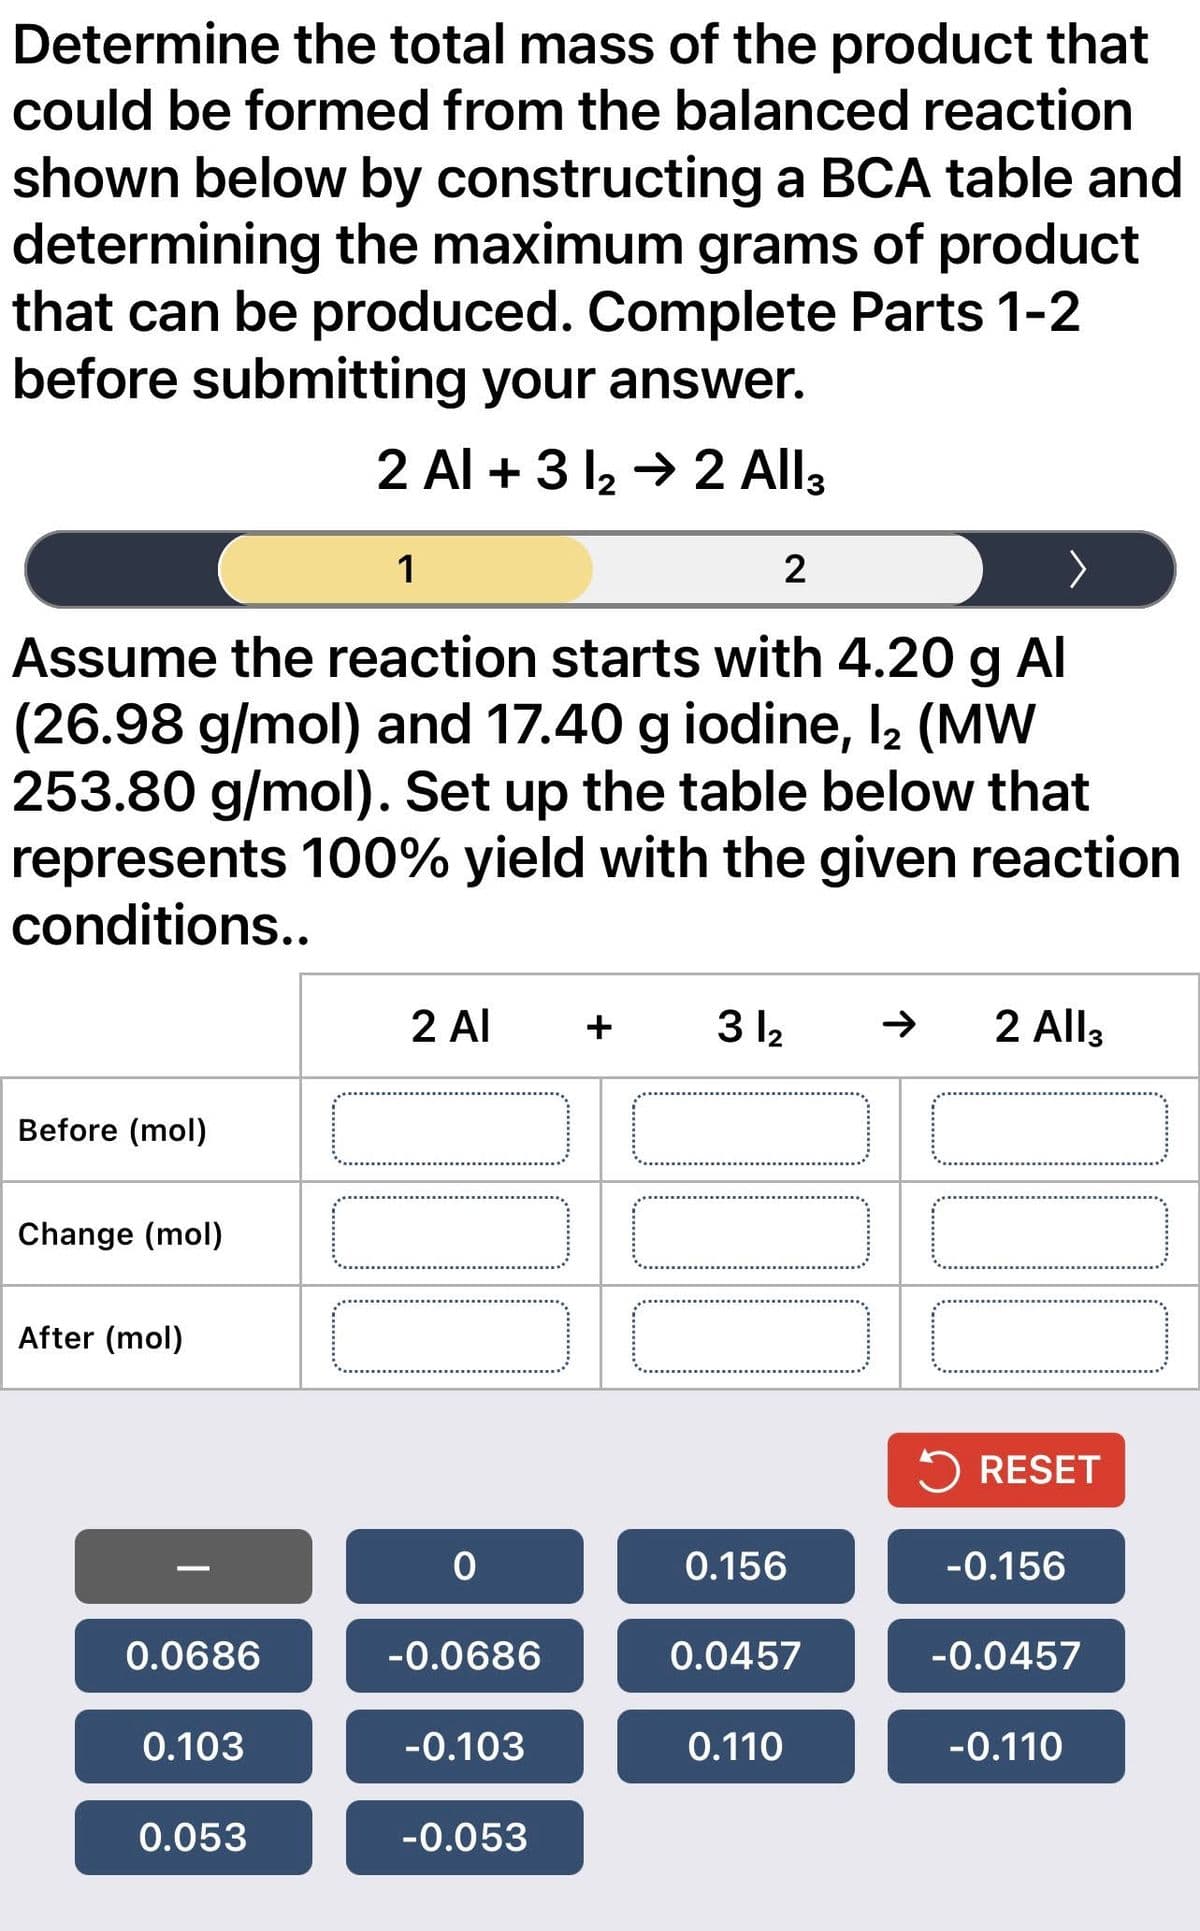 Determine the total mass of the product that
could be formed from the balanced reaction
shown below by constructing a BCA table and
determining the maximum grams of product
that can be produced. Complete Parts 1-2
before submitting your answer.
2 Al +3 1₂ → 2 All3
1
Assume the reaction starts with 4.20 g Al
(26.98 g/mol) and 17.40 g iodine, 12 (MW
253.80 g/mol). Set up the table below that
represents 100% yield with the given reaction
conditions..
Before (mol)
Change (mol)
After (mol)
0.0686
0.103
0.053
2 Al + 31₂
000
0
-0.0686
-0.103
-0.053
2
JOJ
0.156
0.0457
0.110
2 All3
RESET
-0.156
-0.0457
-0.110